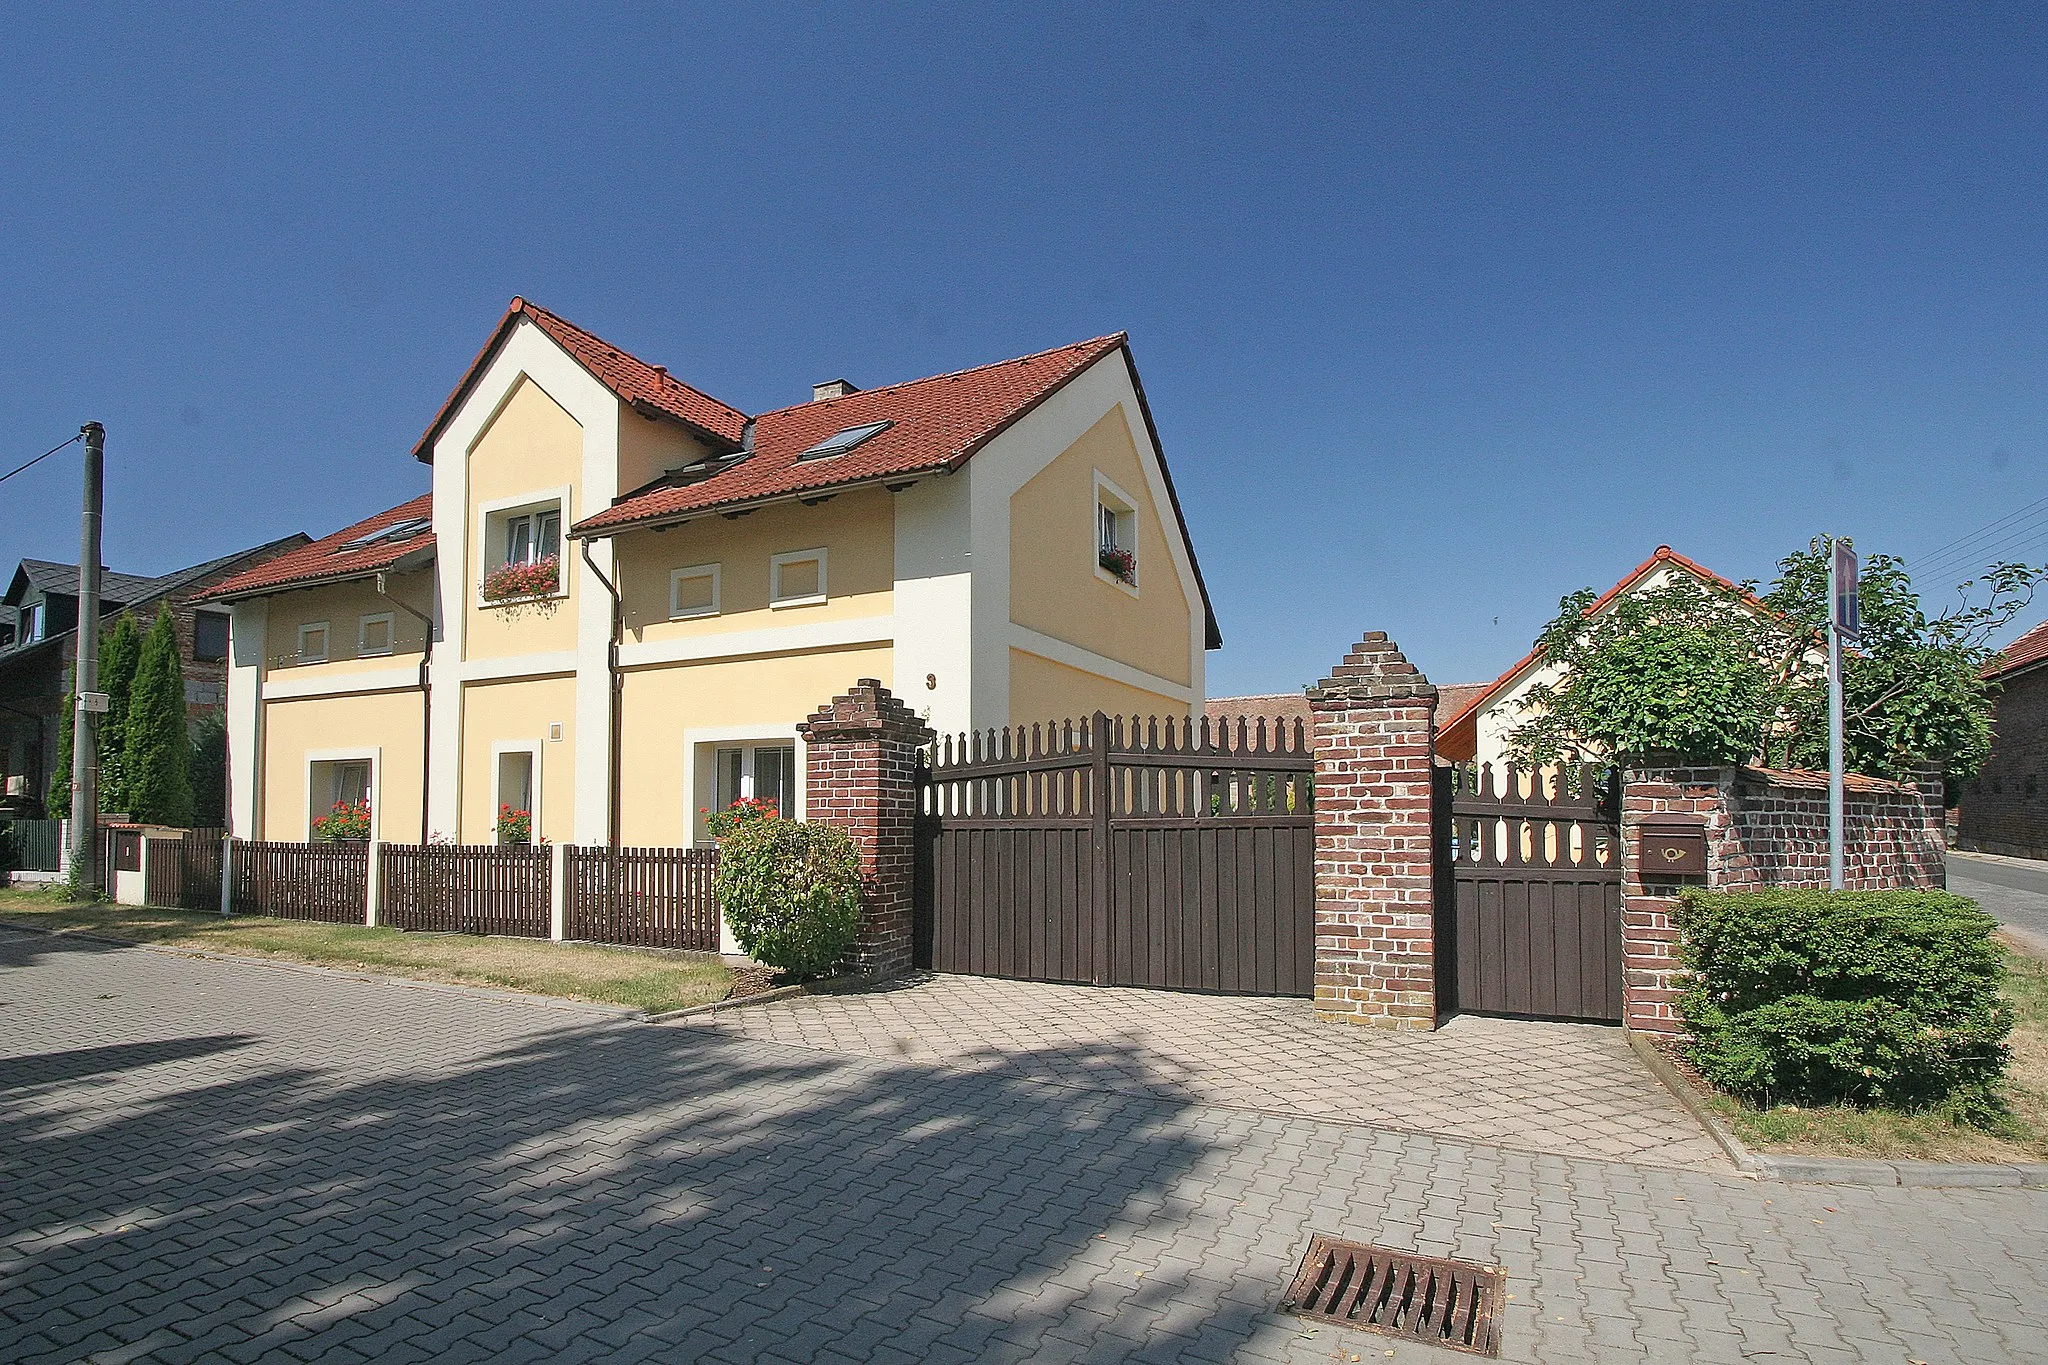 Photo showing: Bříza čp. 9
Camera location 50° 14′ 28.99″ N, 15° 45′ 57.78″ E View this and other nearby images on: OpenStreetMap 50.241387;   15.766051

This file was created as a part of the photographic program of Wikimedia Czech Republic. Project: Foto českých obcí The program supports Wikimedia Commons photographers in the Czech Republic.